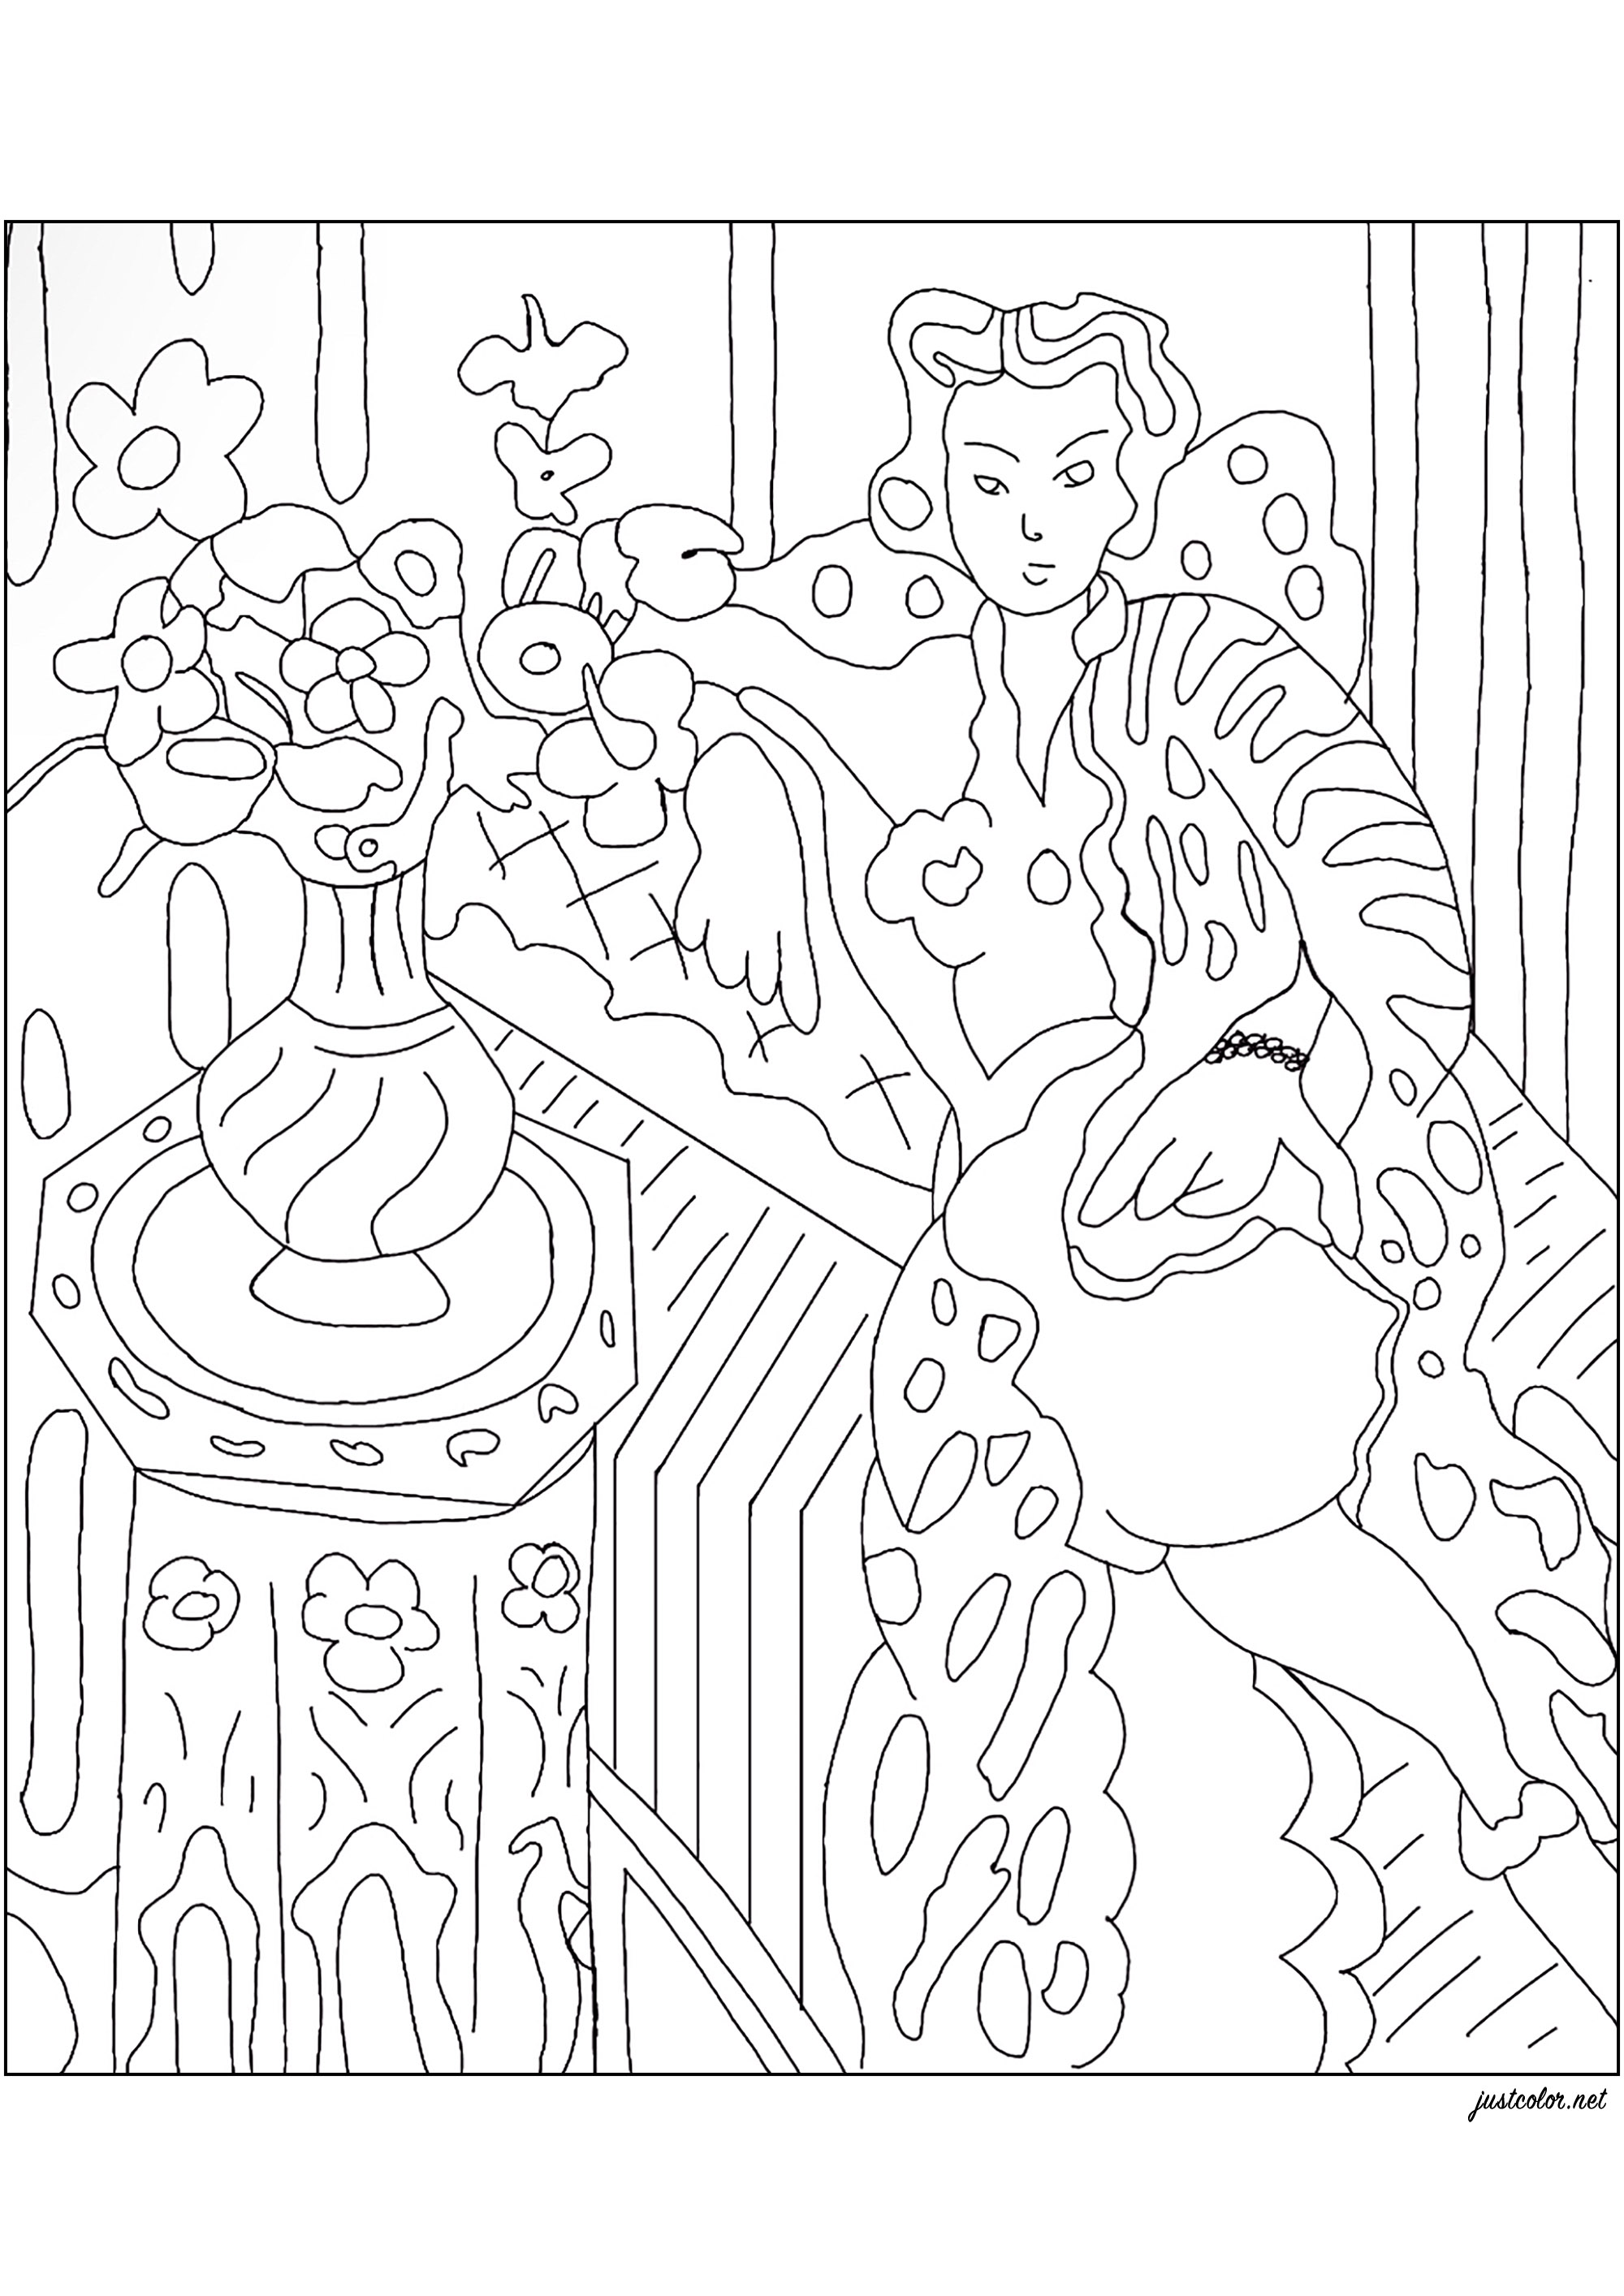 Coloring from 'Odalisque a la robe persane jaune' (1937) by Henri Matisse. In this painting, Matisse uses his familiar model, Hélène Galtzine, to depict a figure dressed in a yellow Persian dress, surrounded by the painter's personal objects, creating a dreamlike interior. Inspired by his travels in the Maghreb, Matisse revisited the odalisque motif, inherited from Orientalist nudes, modernizing them and transforming them into archetypes of the modern woman between the wars.